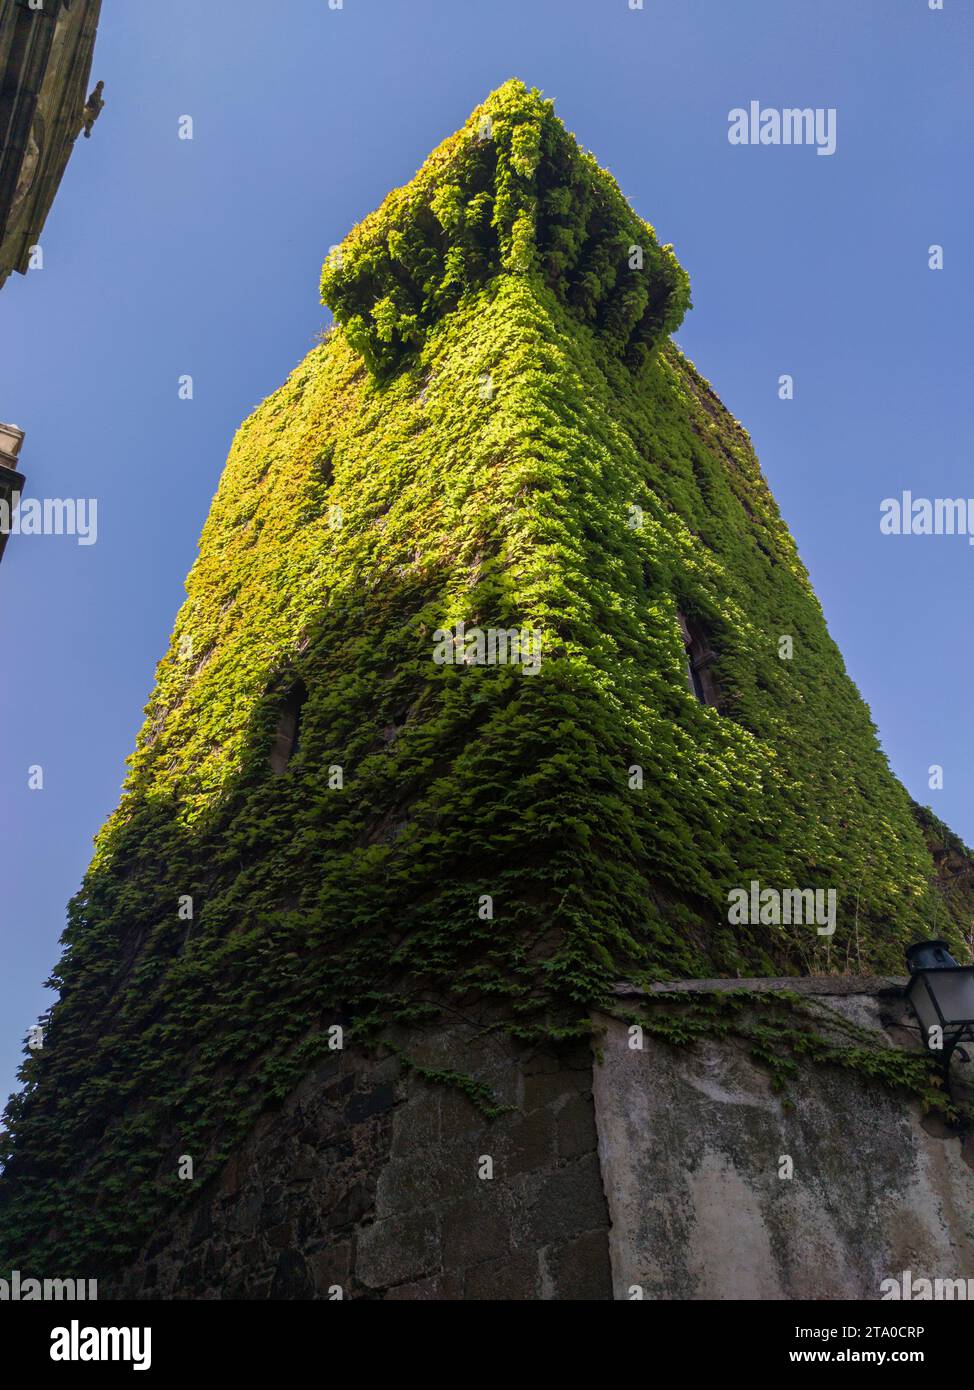 Sande Tower, Medieval old palace house covered in green Virginia creeper, Caceres, Extremadura, Spain Stock Photo